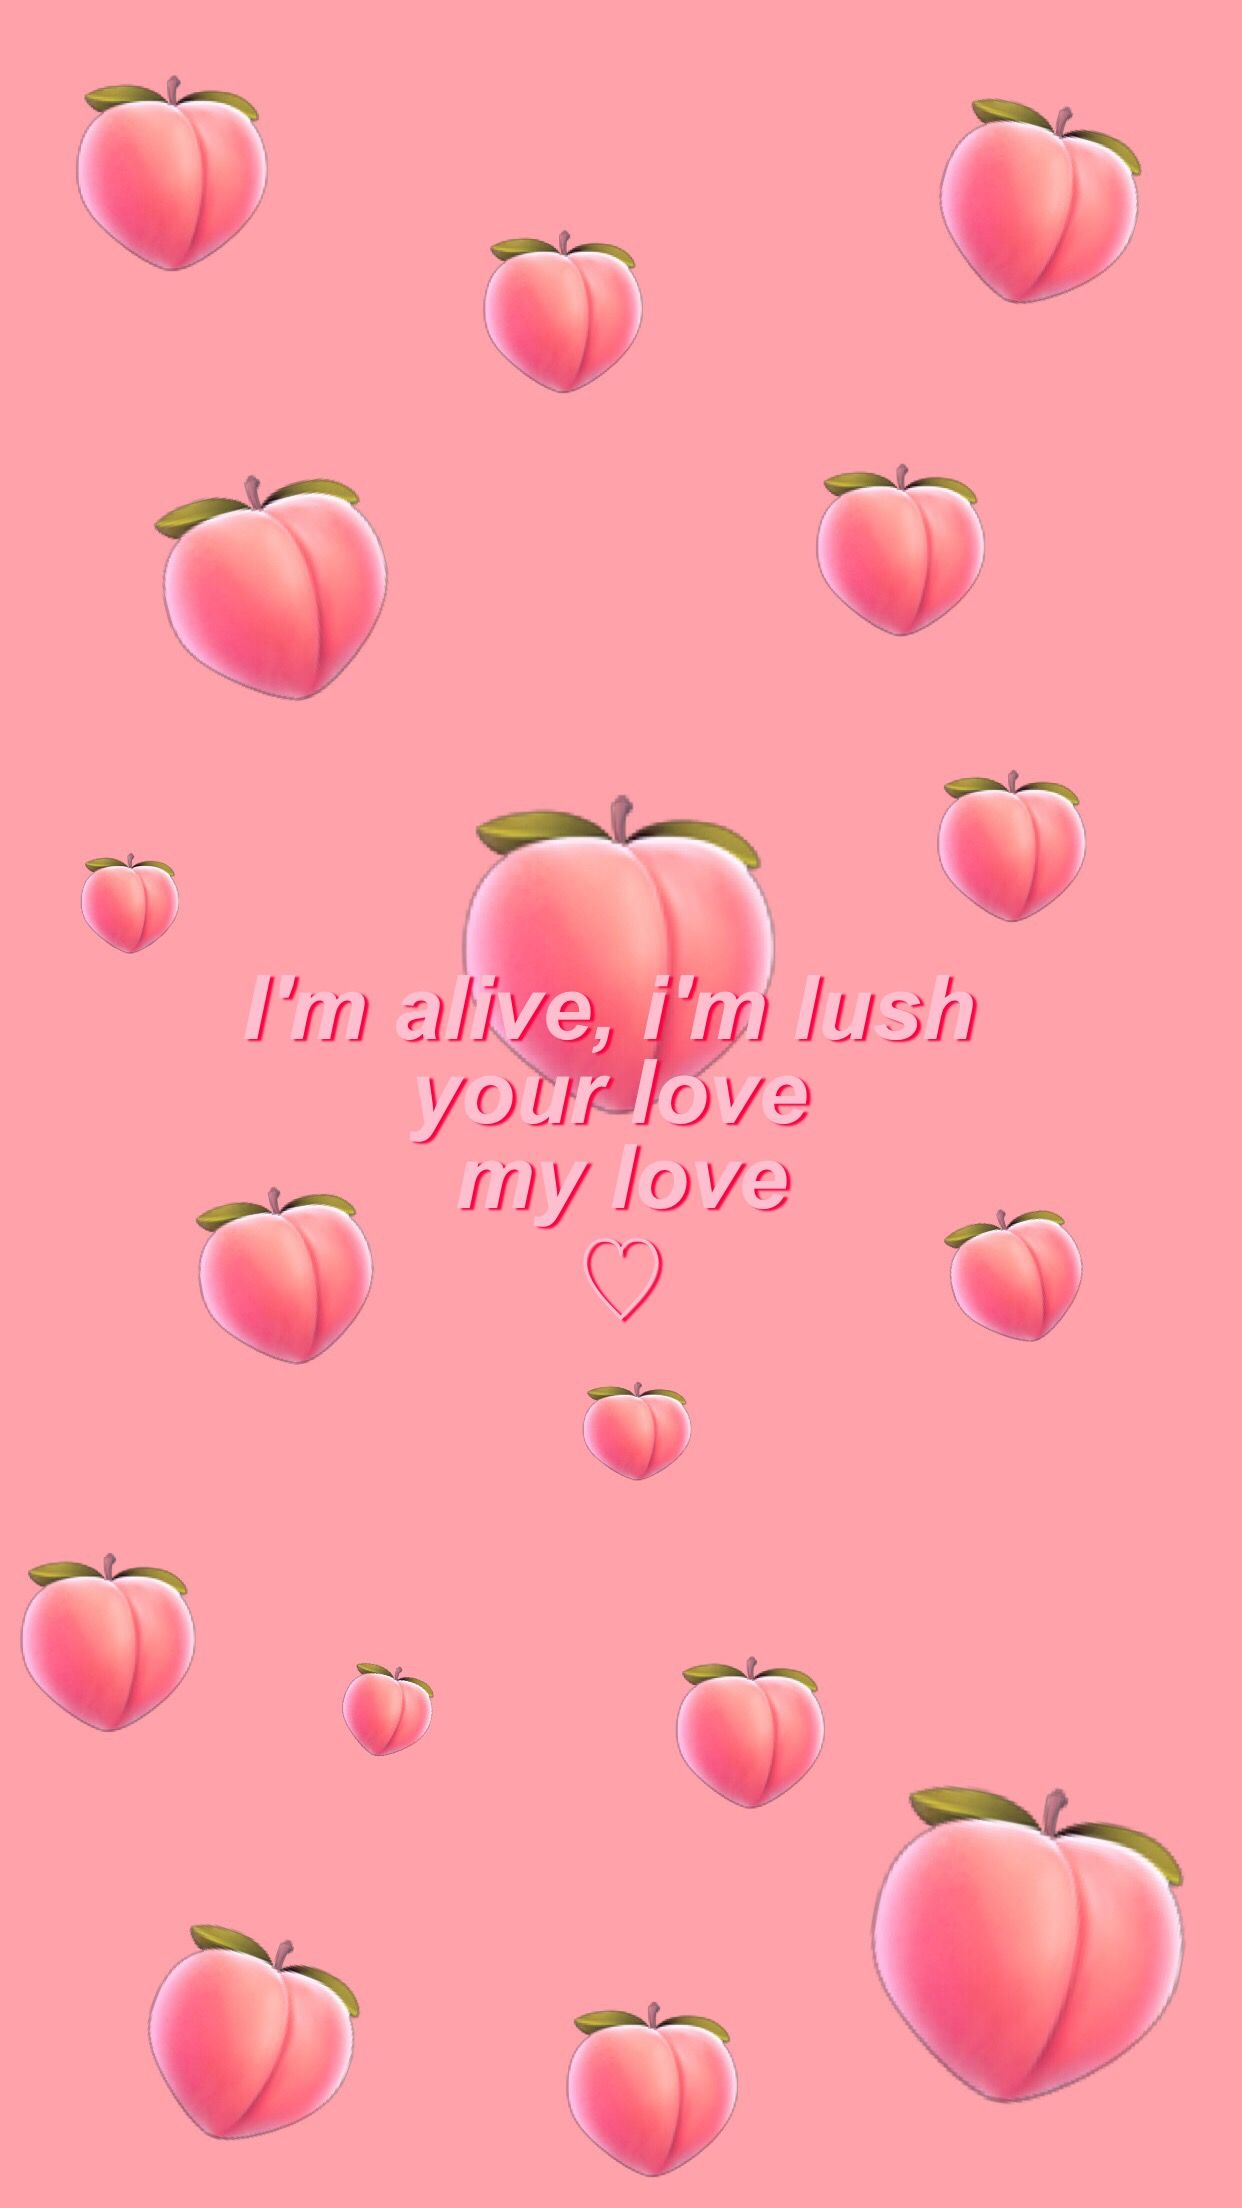 IPhone wallpaper with peachs and the quote 